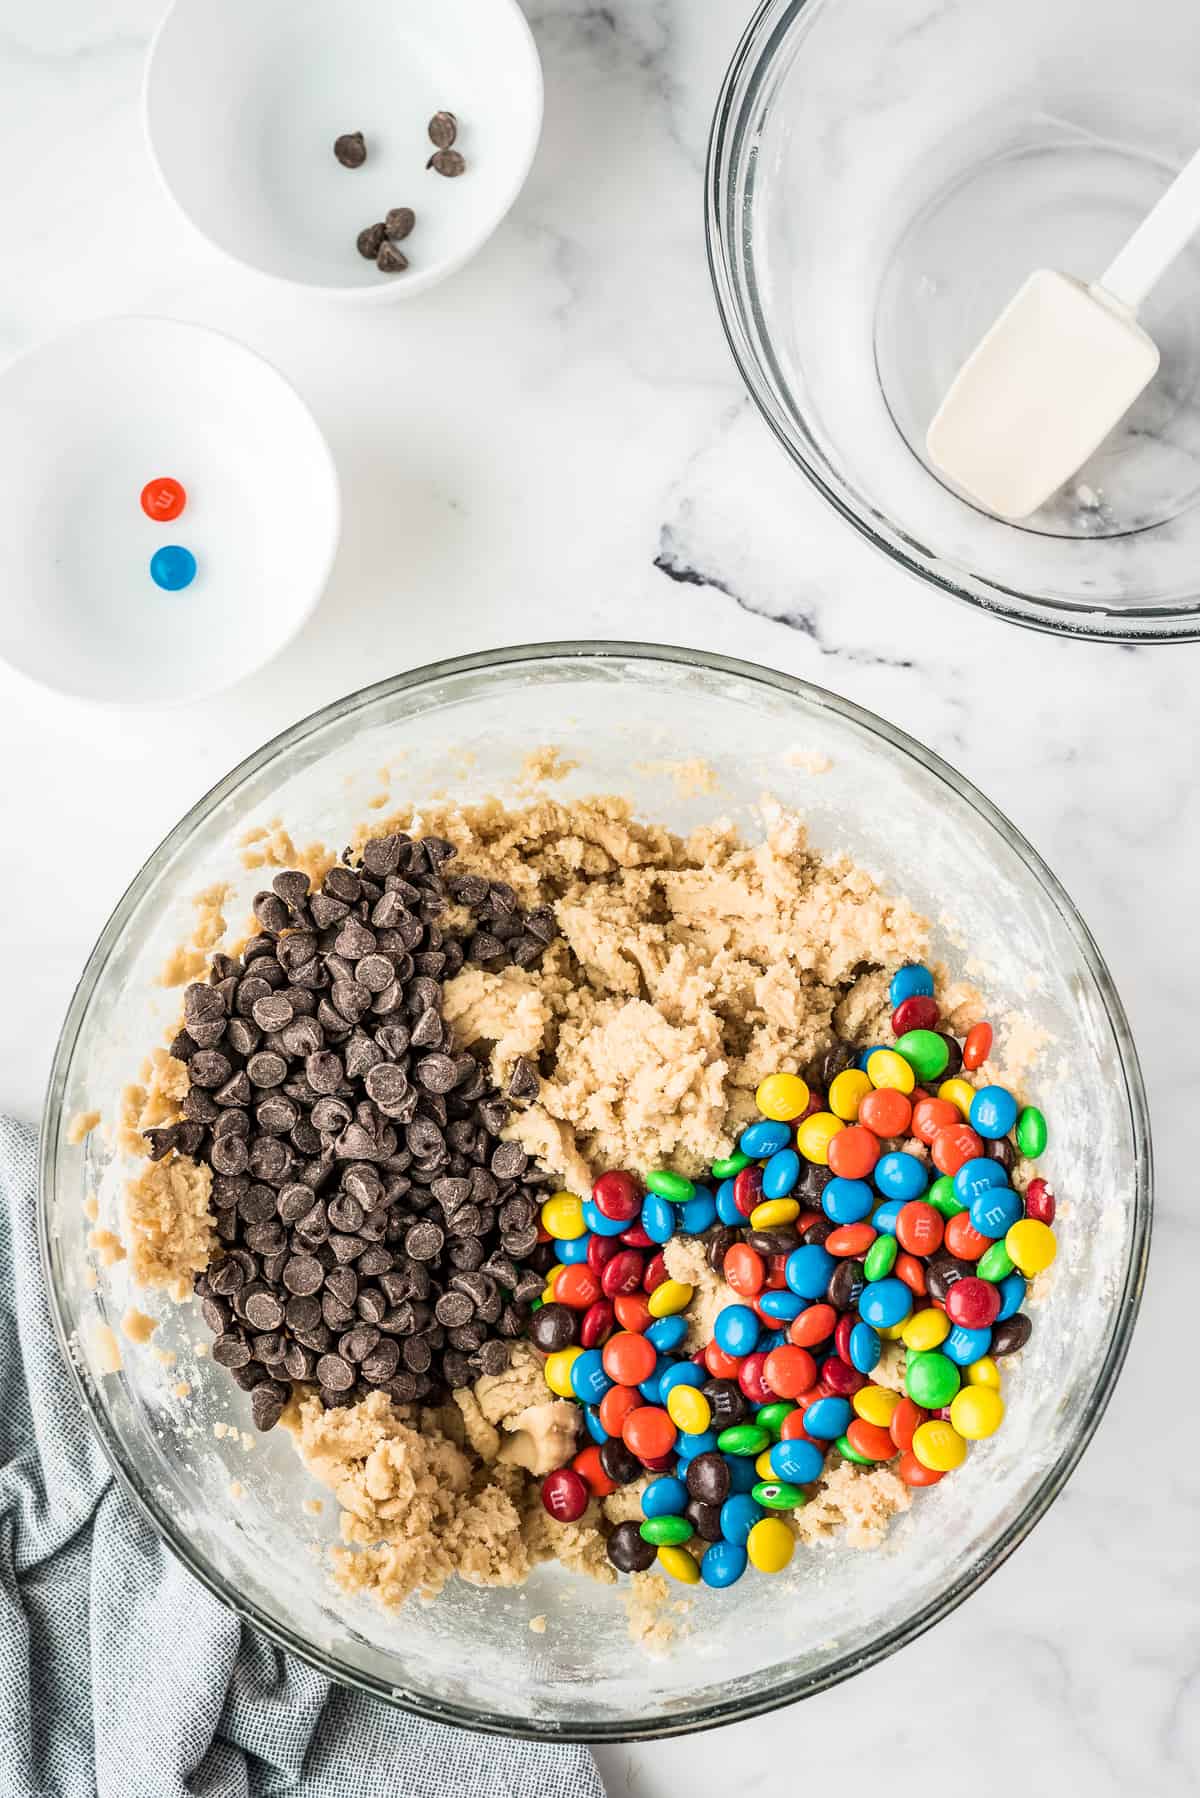 Cookie dough with chocolate chips and M&Ms